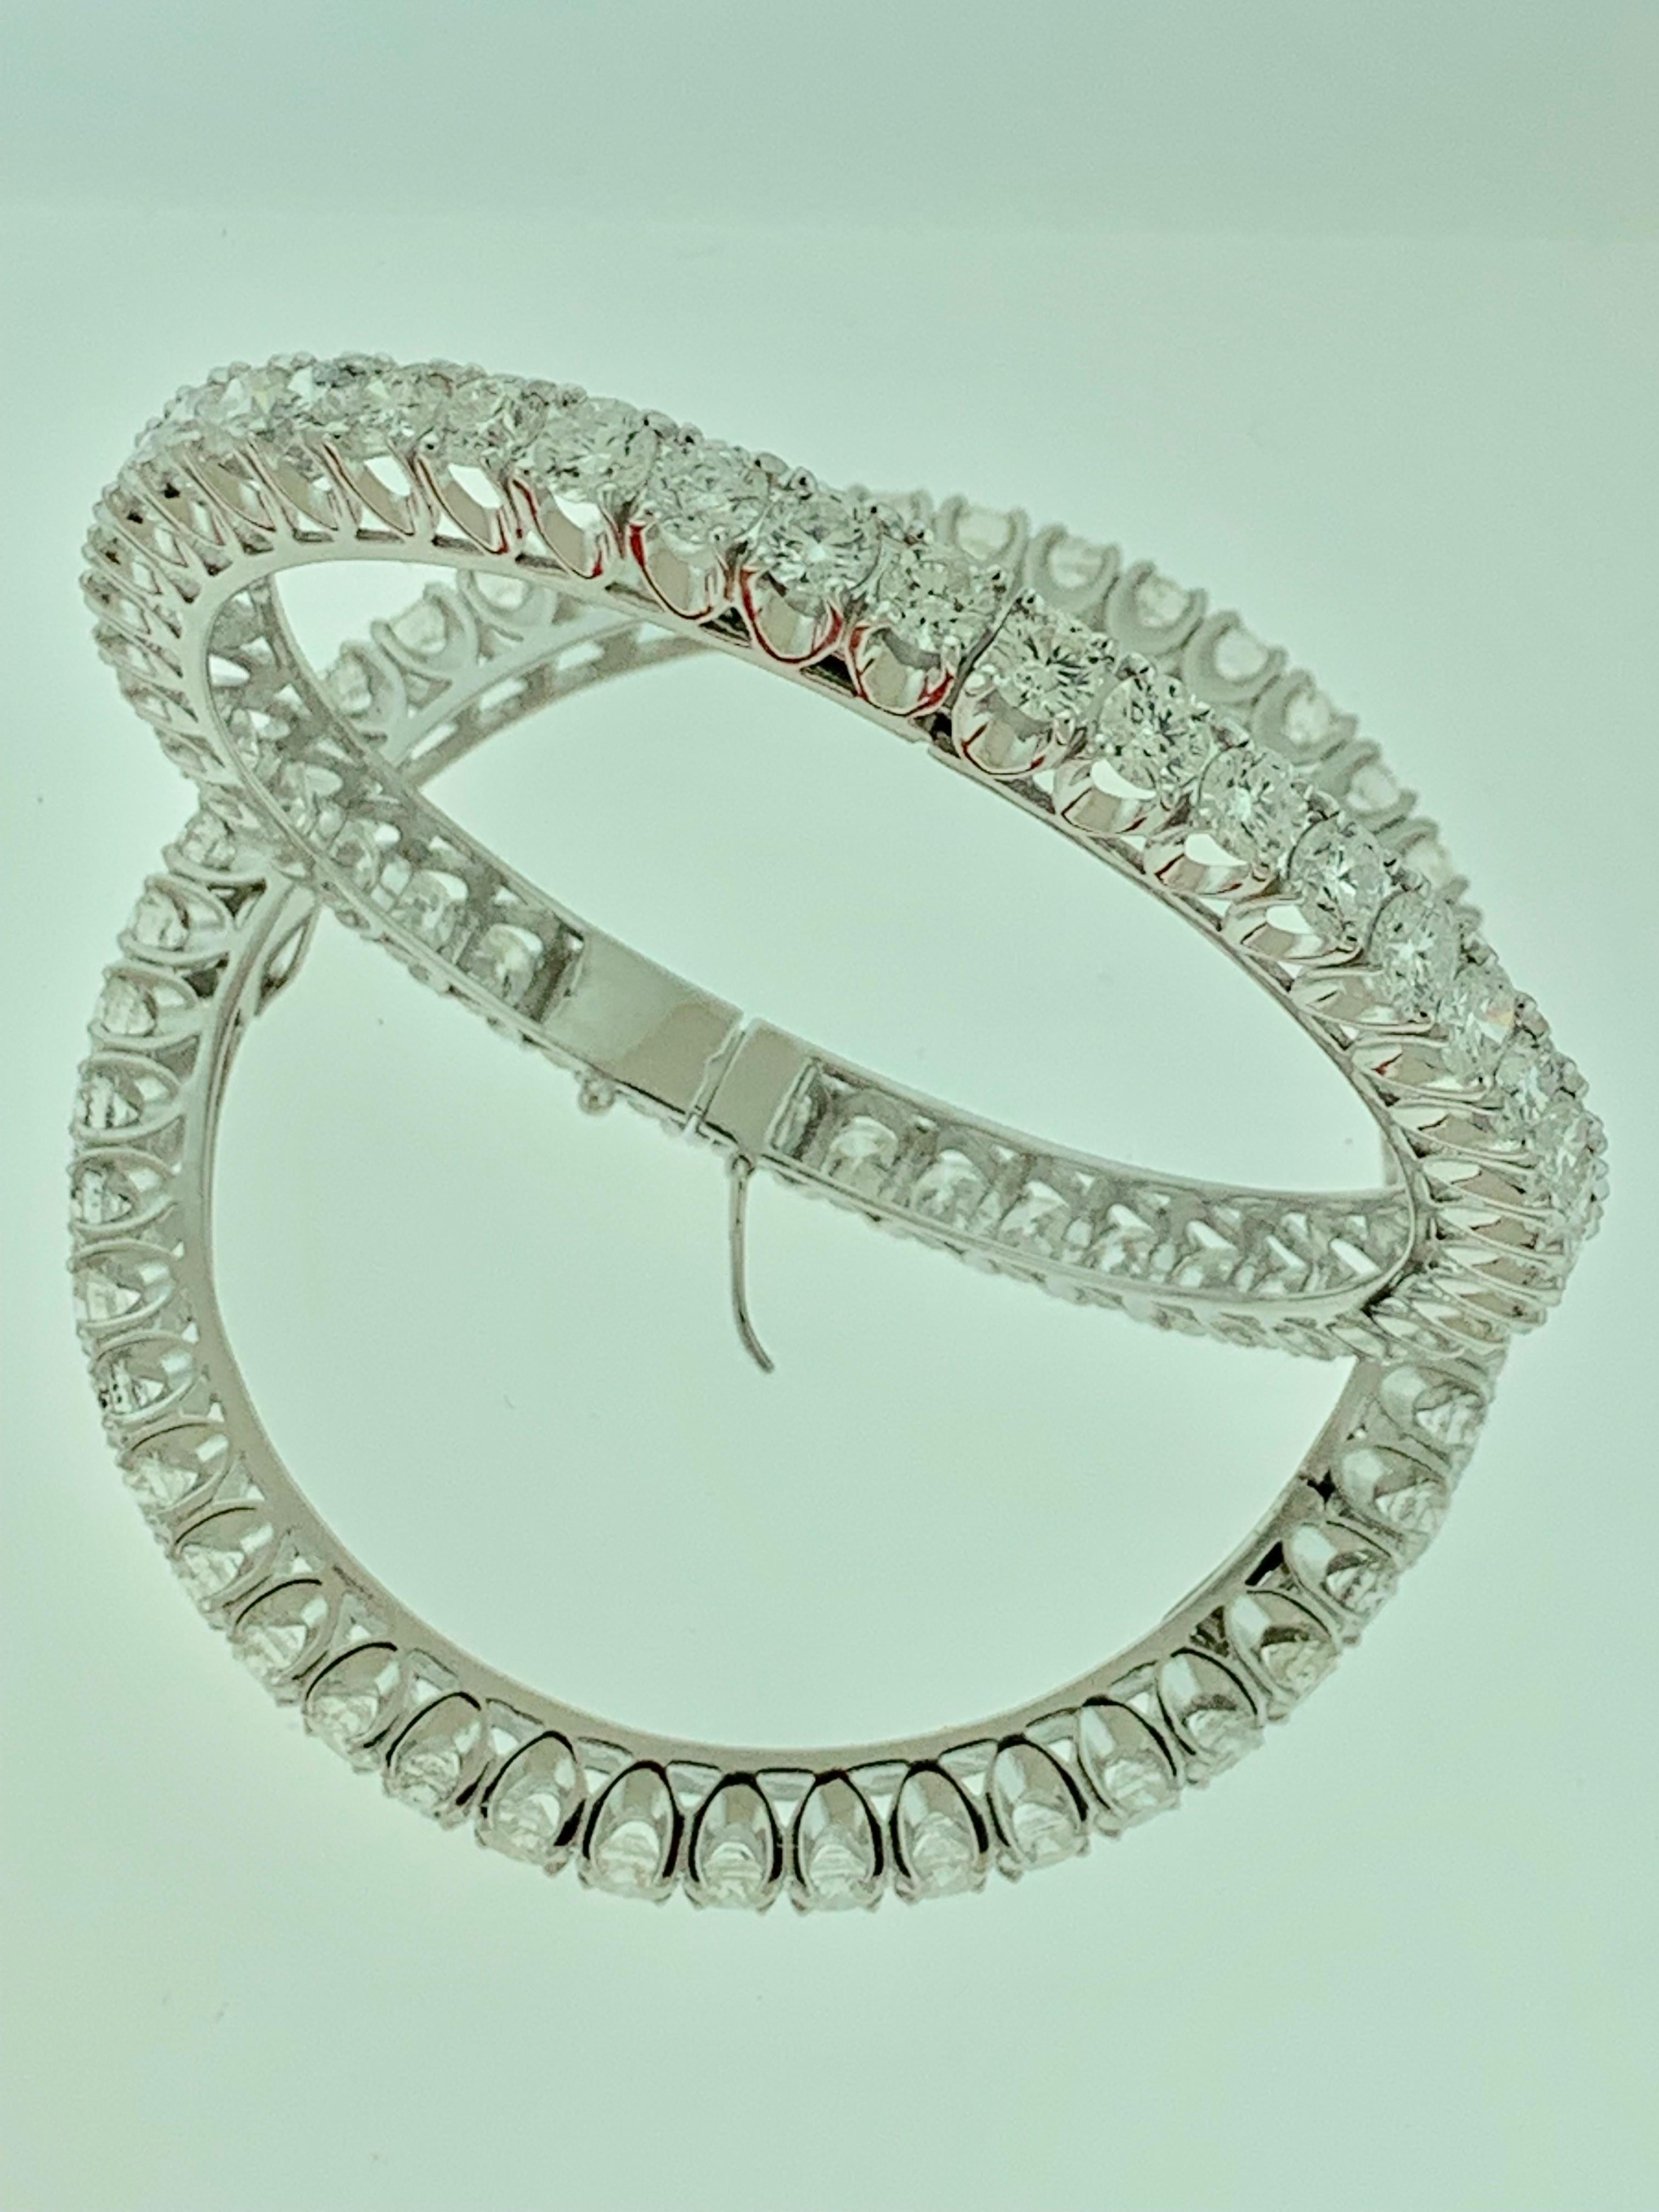 40 Pointer Each, 36 Ct Single Line Eternity 18 Kt Gold and Diamond Bangle, Pair For Sale 4